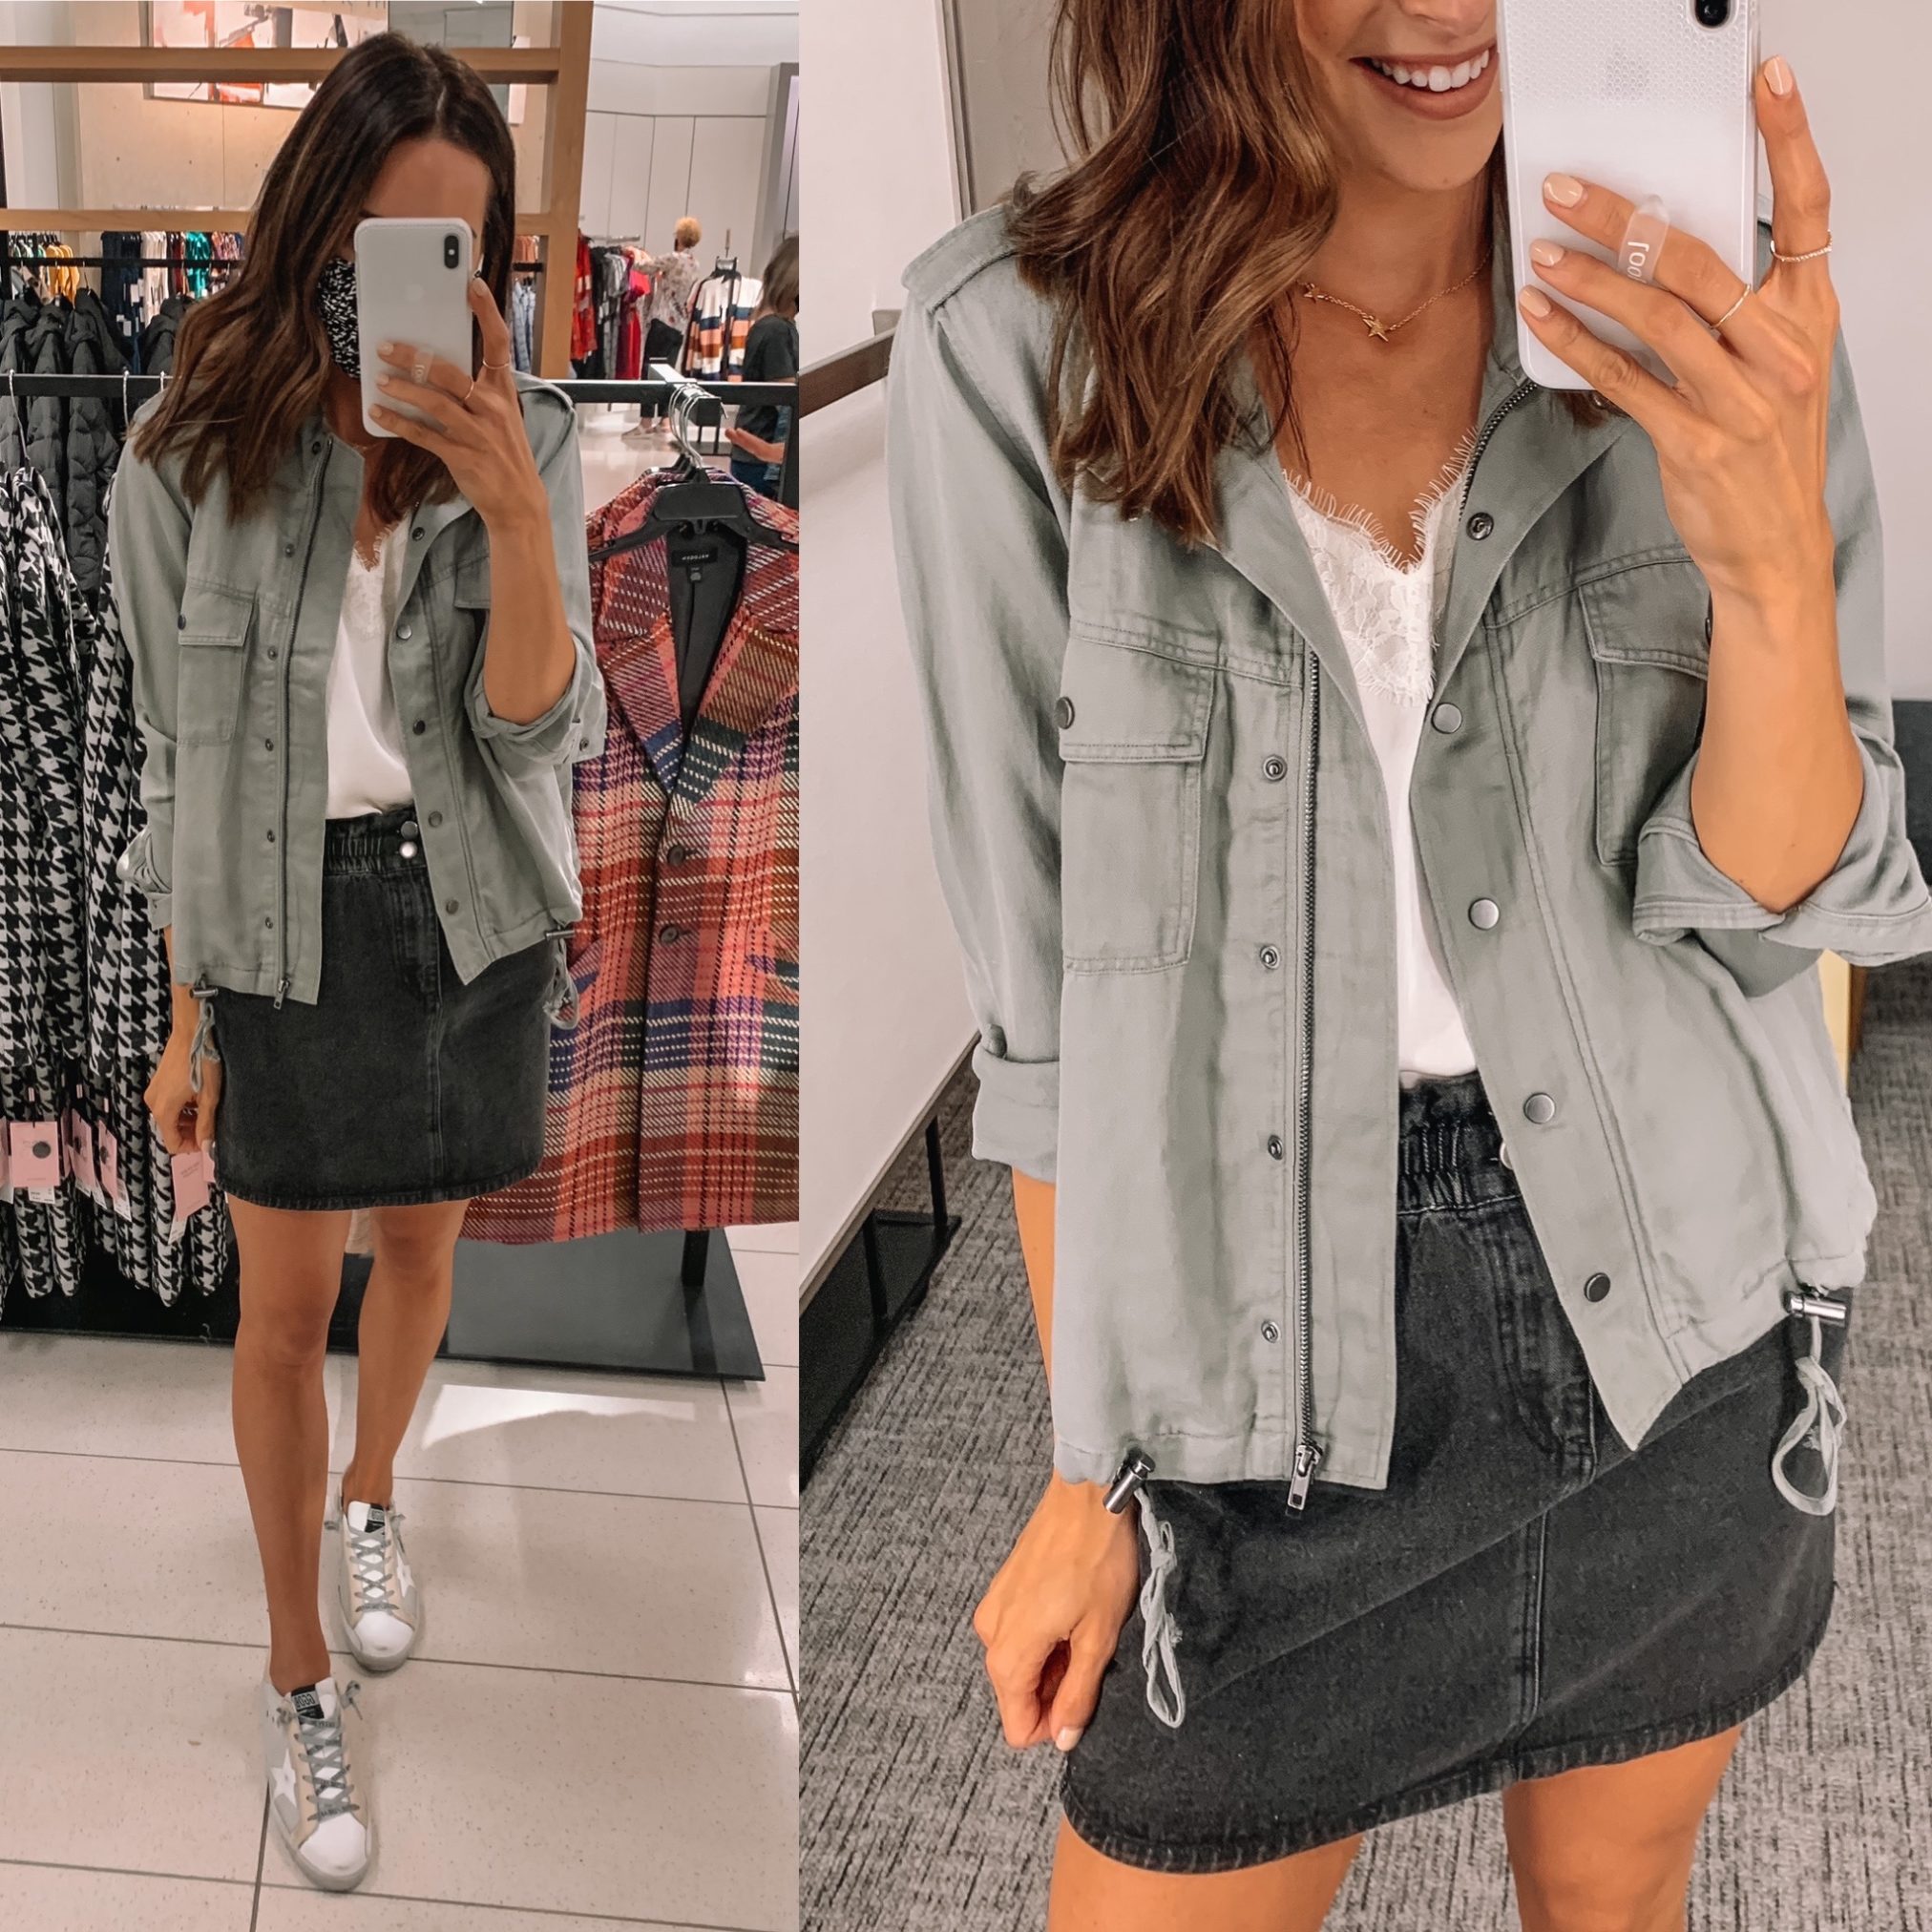 nsale 2020, nsale try on, Nordstrom anniversary sale, rails military jacket